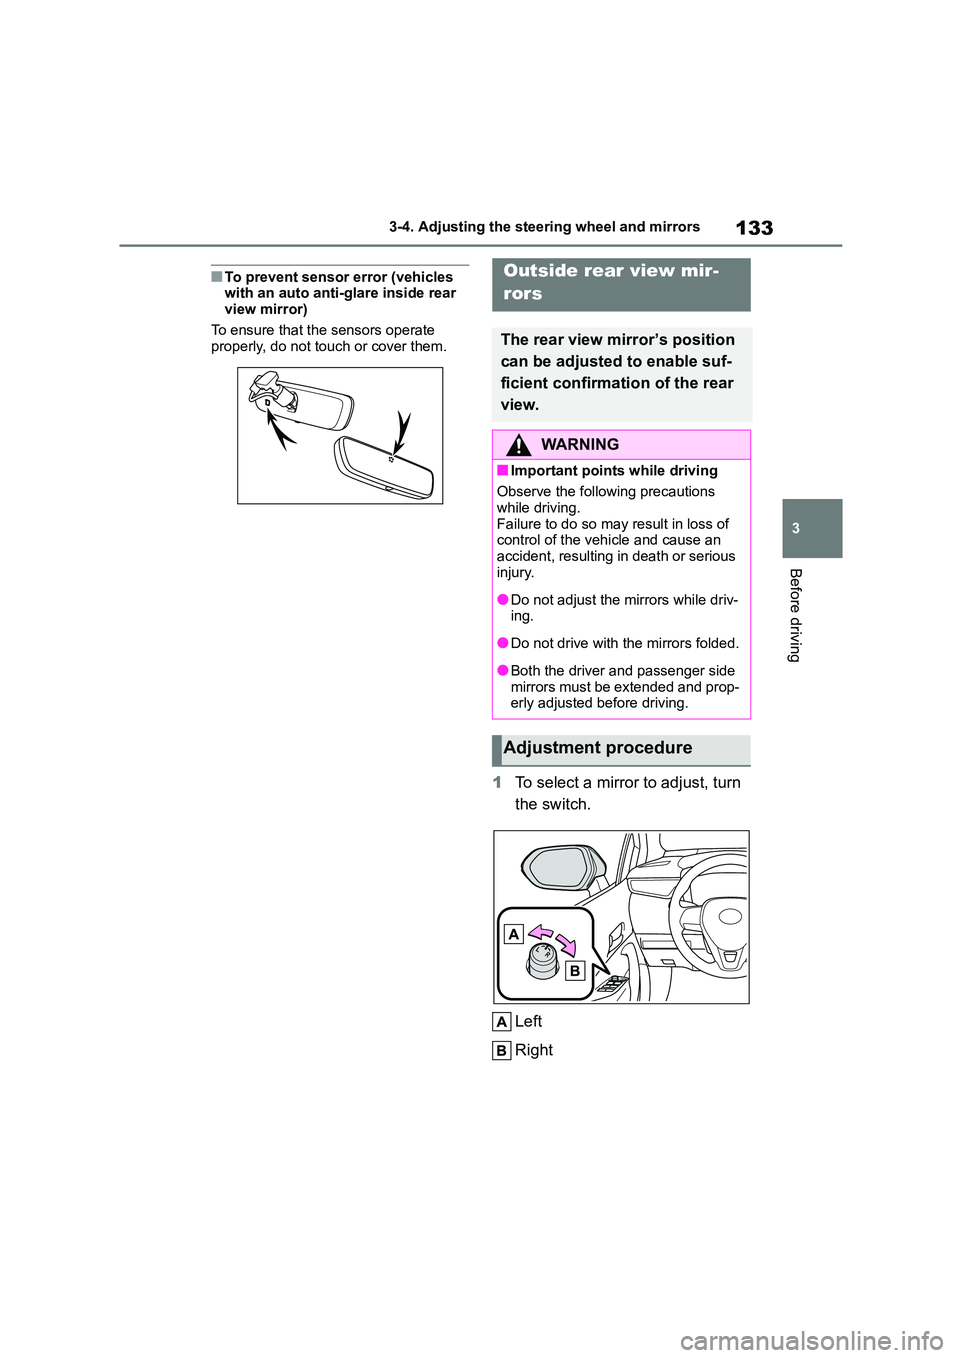 TOYOTA COROLLA 2022  Owners Manual (in English) 133
3 
3-4. Adjusting the steering wheel and mirrors
Before driving
■To prevent sensor error (vehicles  with an auto anti-glare inside rear  
view mirror) 
To ensure that the sensors operate  proper